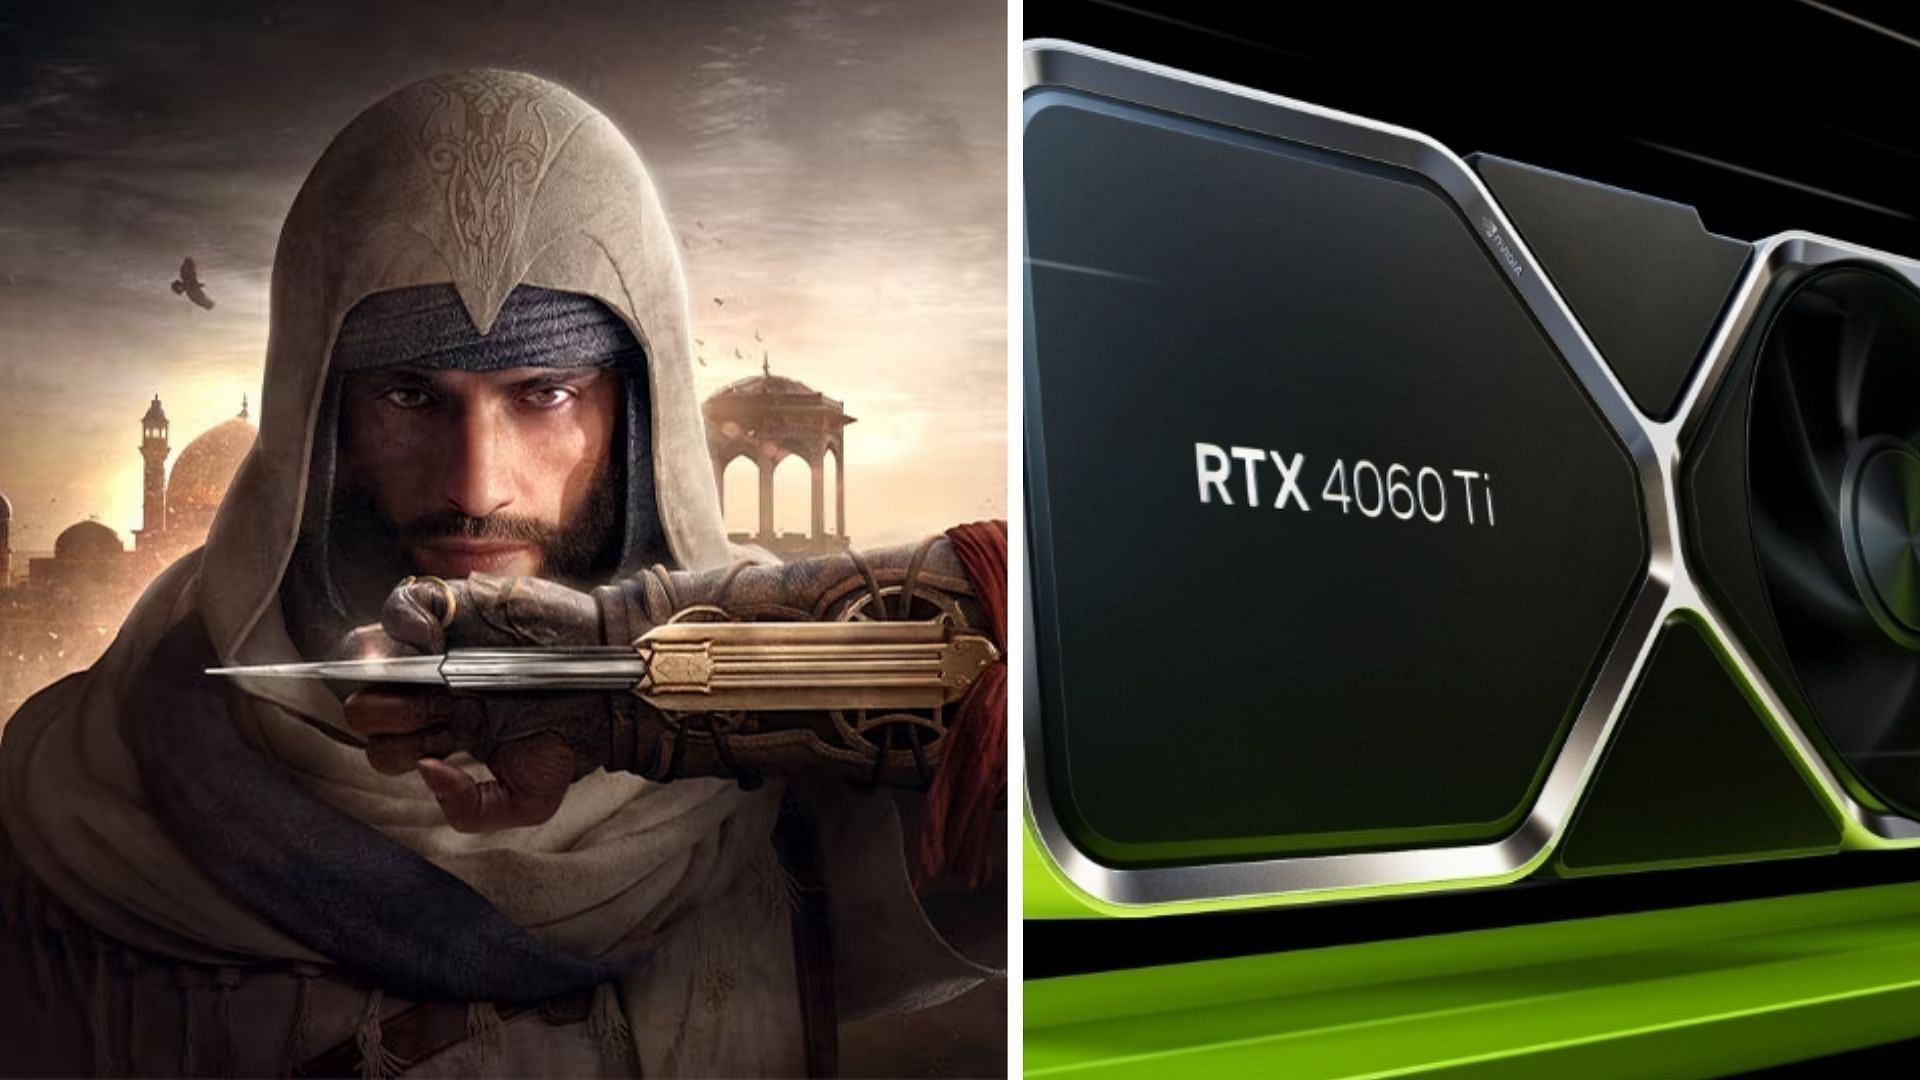 The Nvidia RTX 4060 and 4060 Ti can play Assassin